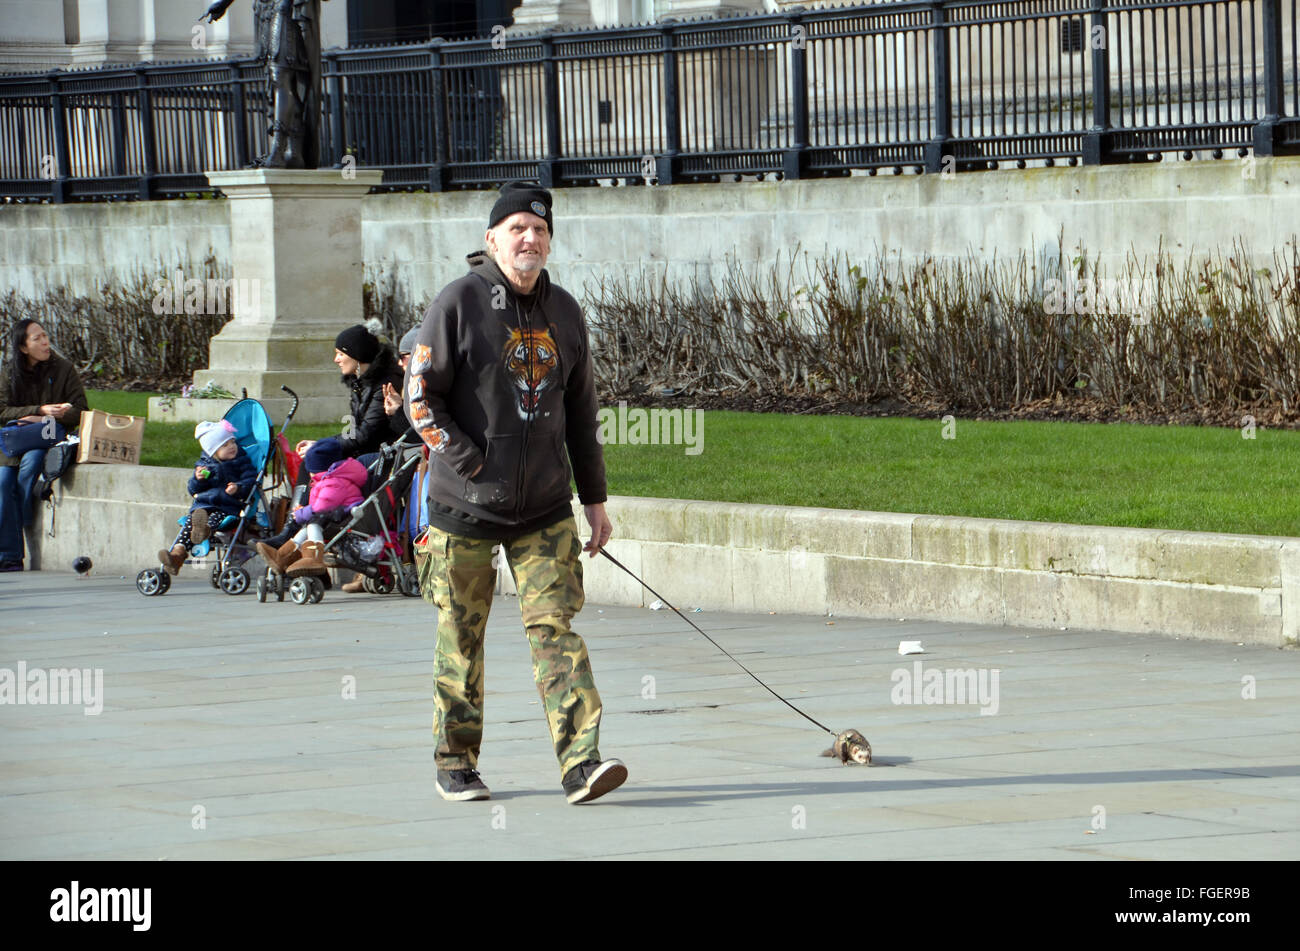 London, UK, 18 February 2016, a man walks a pet ferret on a lead in front of the National Gallery in Trafalgar Square. Stock Photo